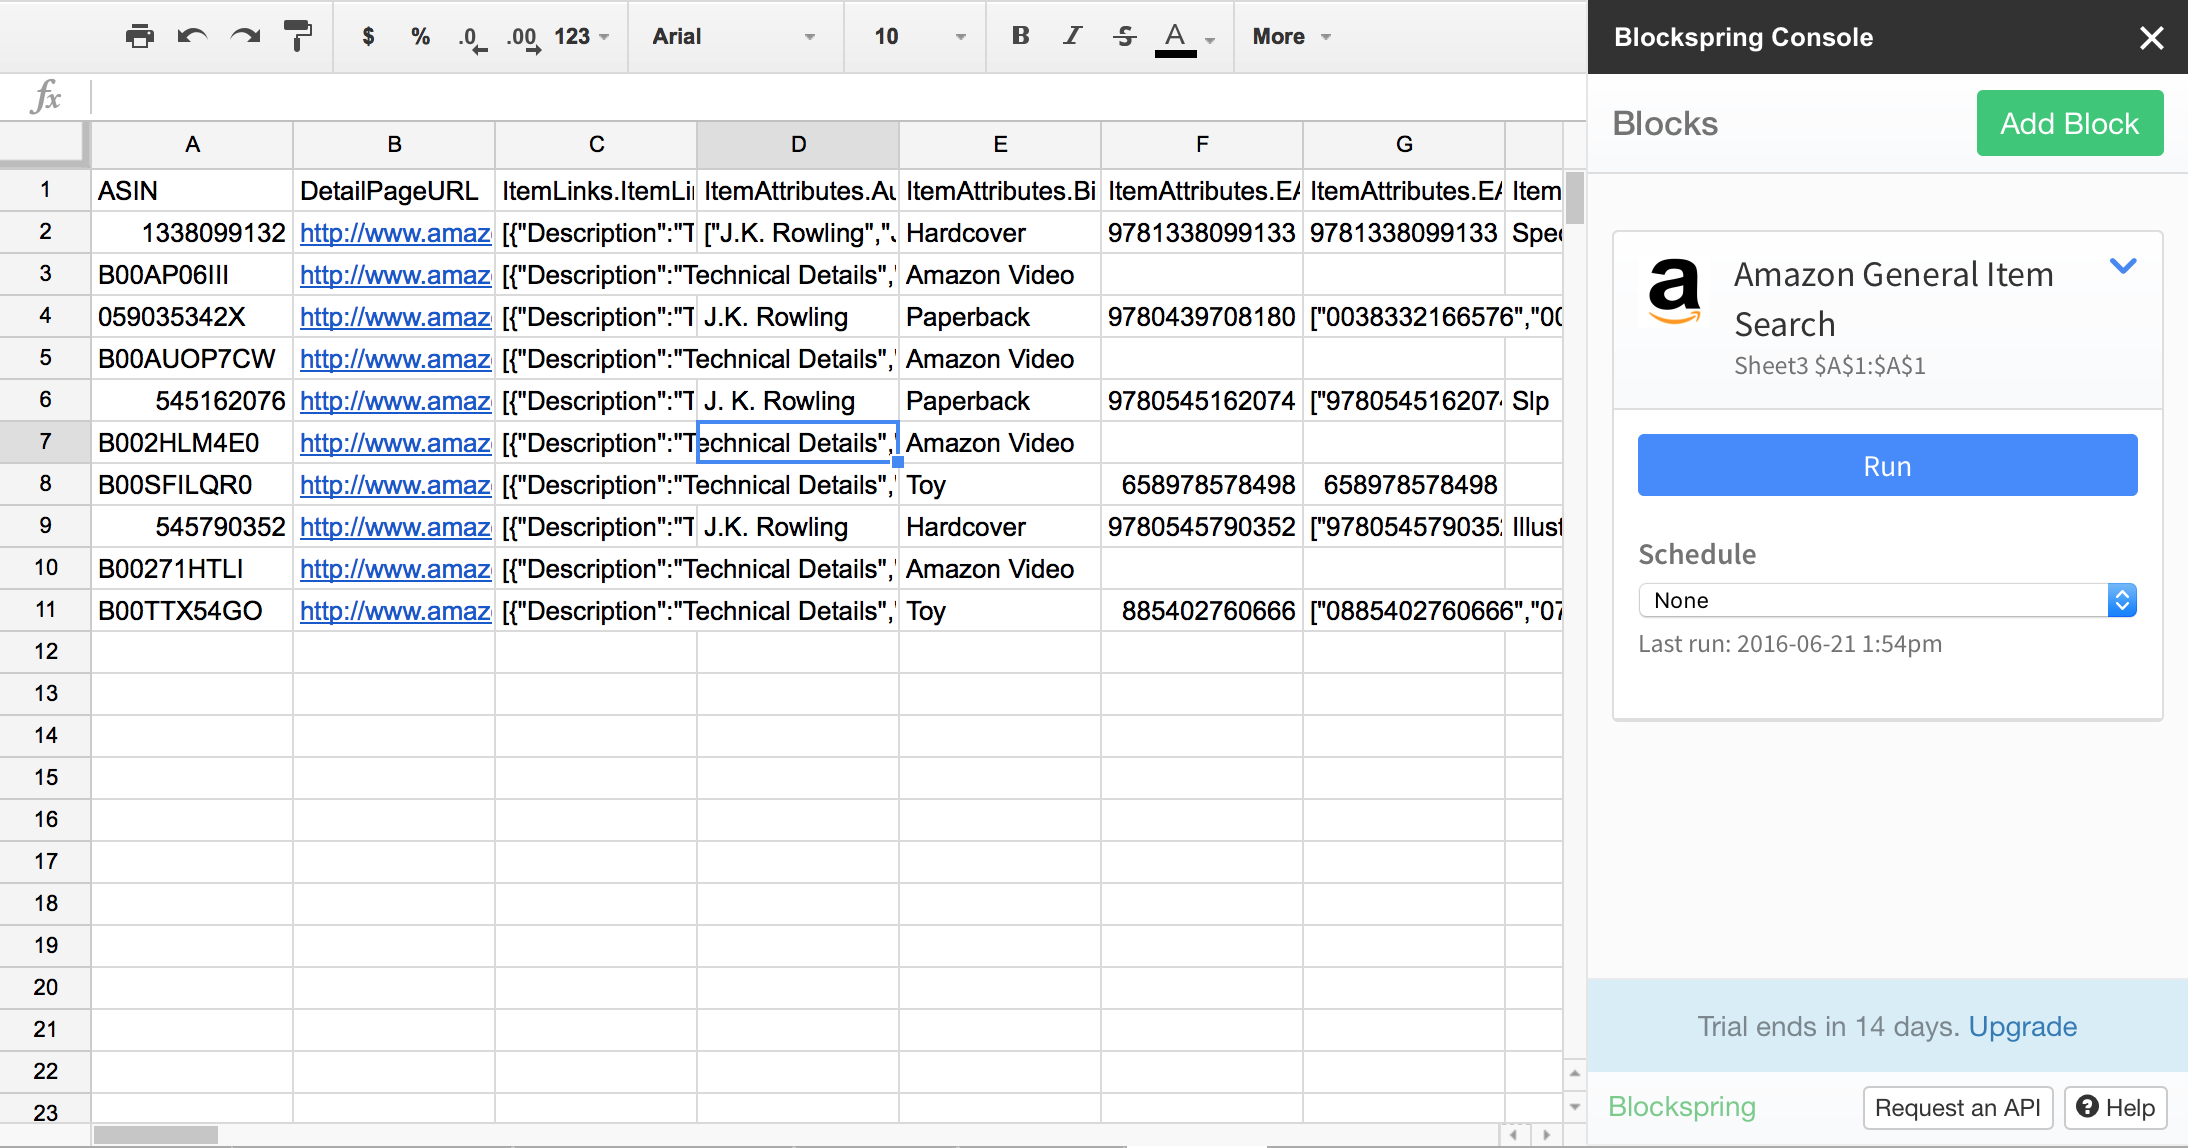 Generic item. Excel and Google Drive.